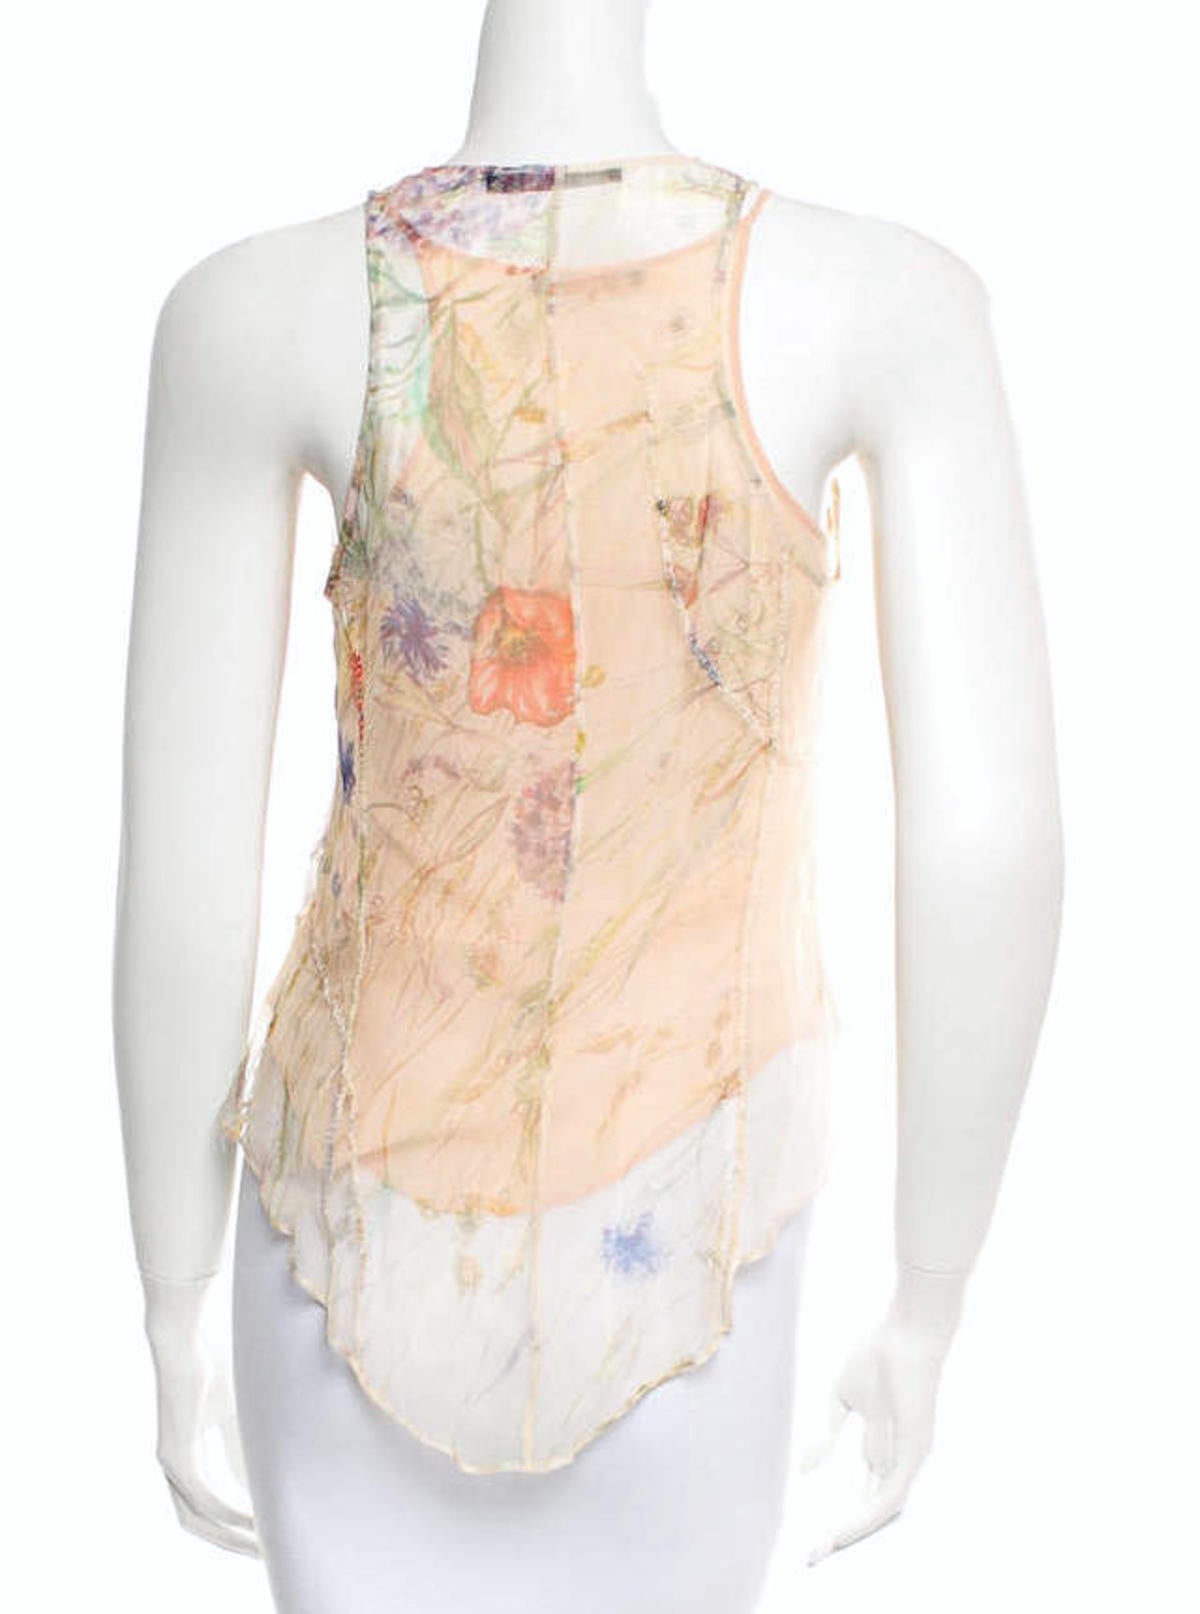 Alexander McQueen Semi-Sheer Silk Floral Blouse In Good Condition For Sale In Bethesda, MD